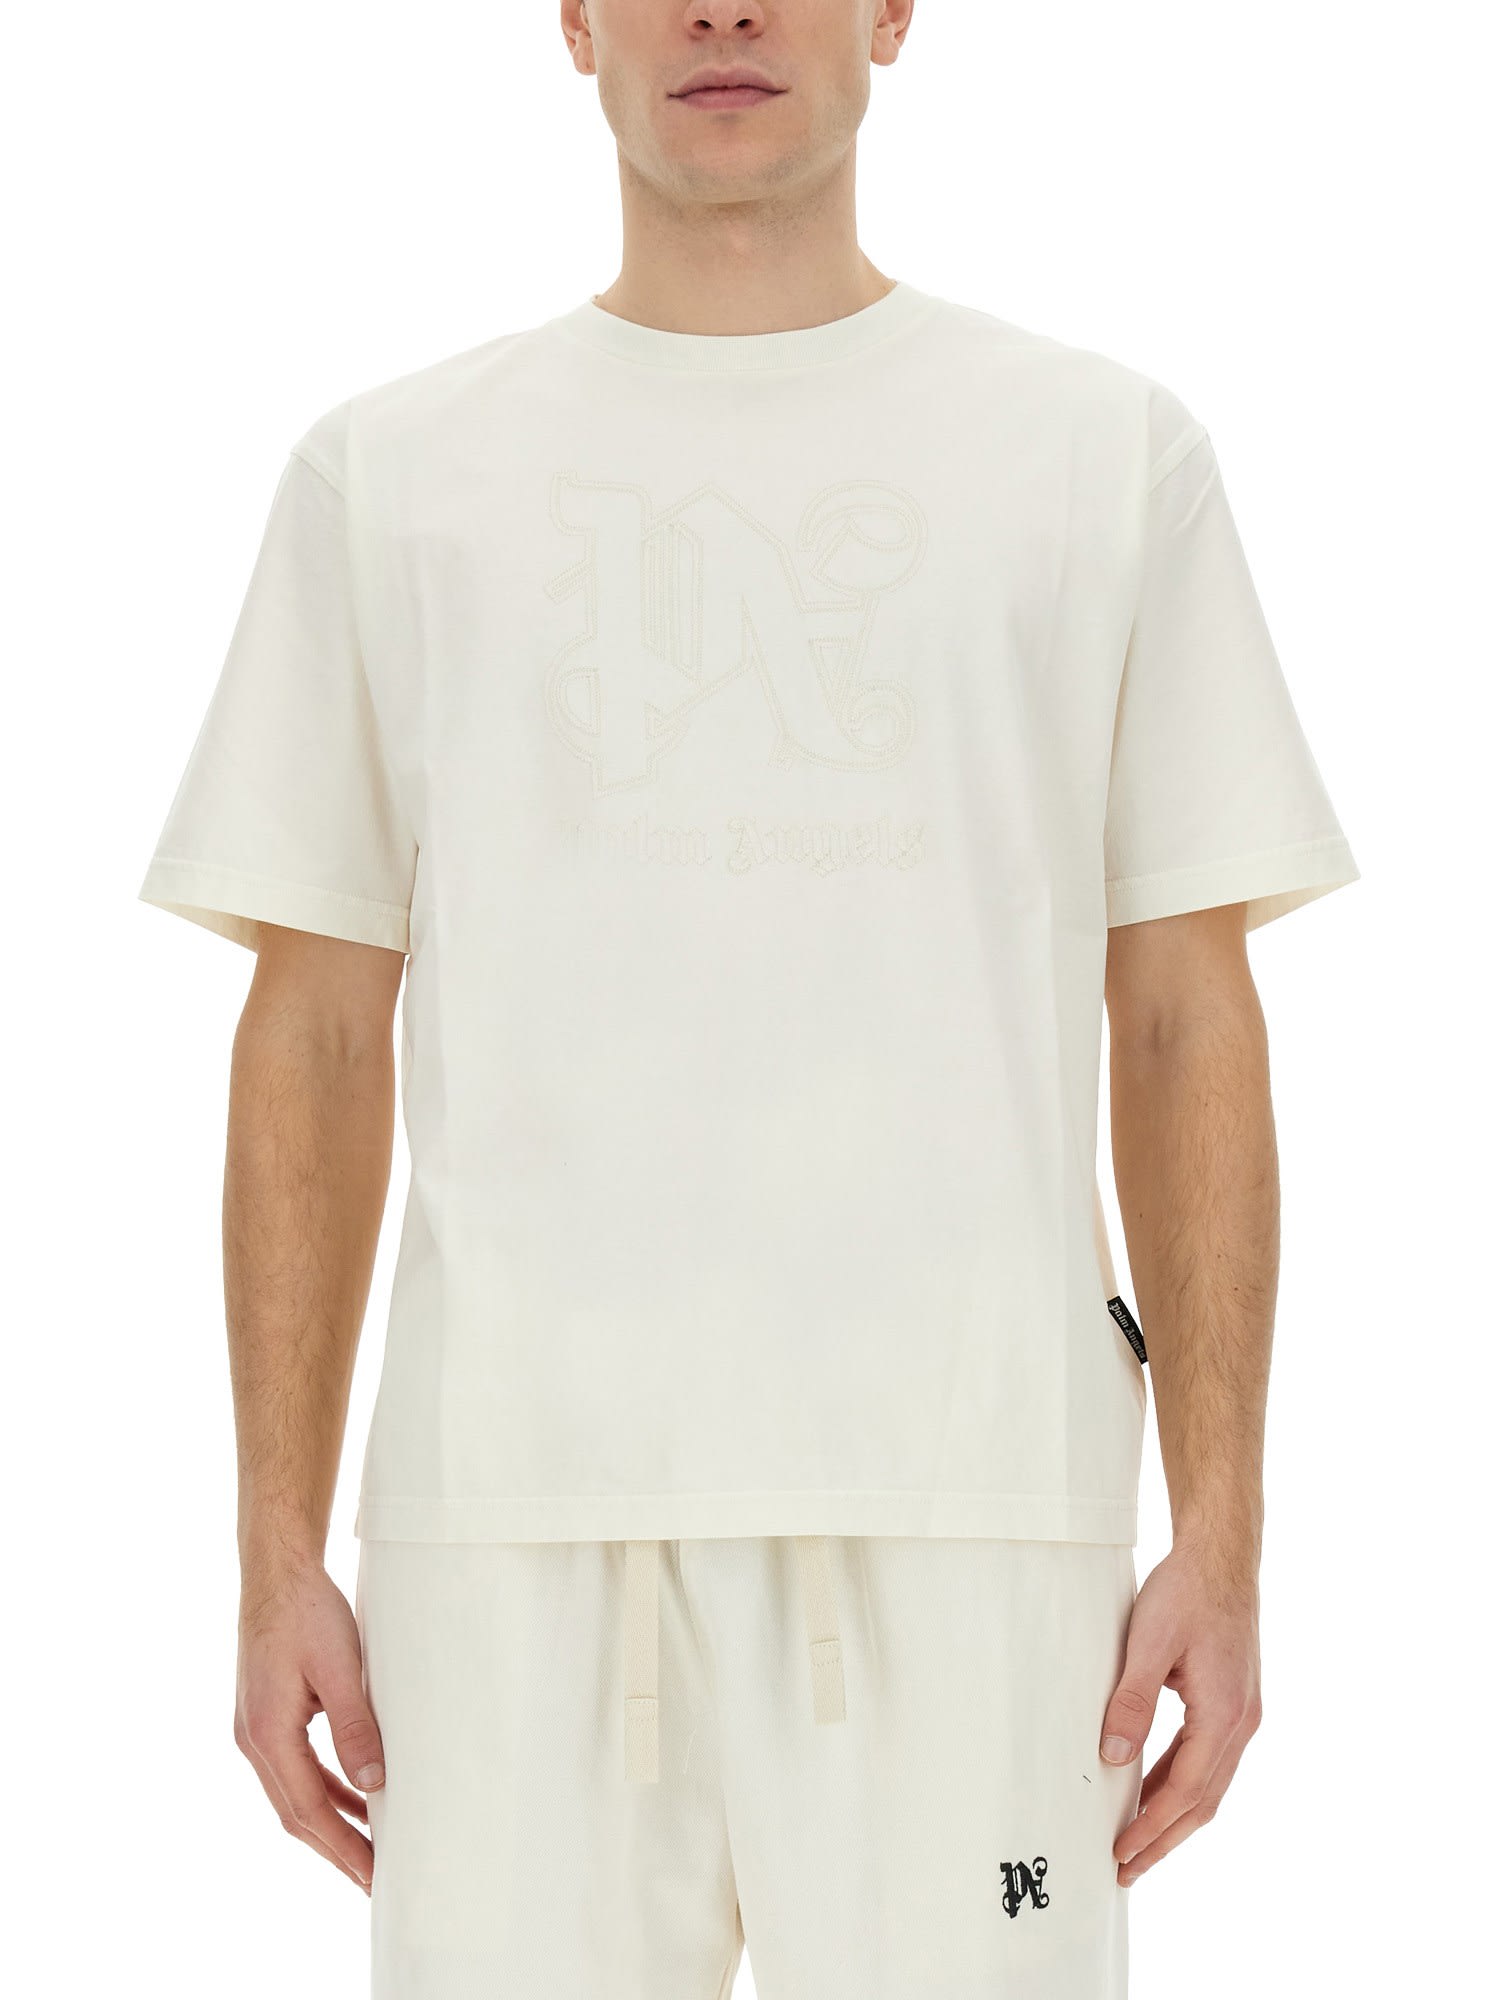 PALM ANGELS T-SHIRT WITH LOGO